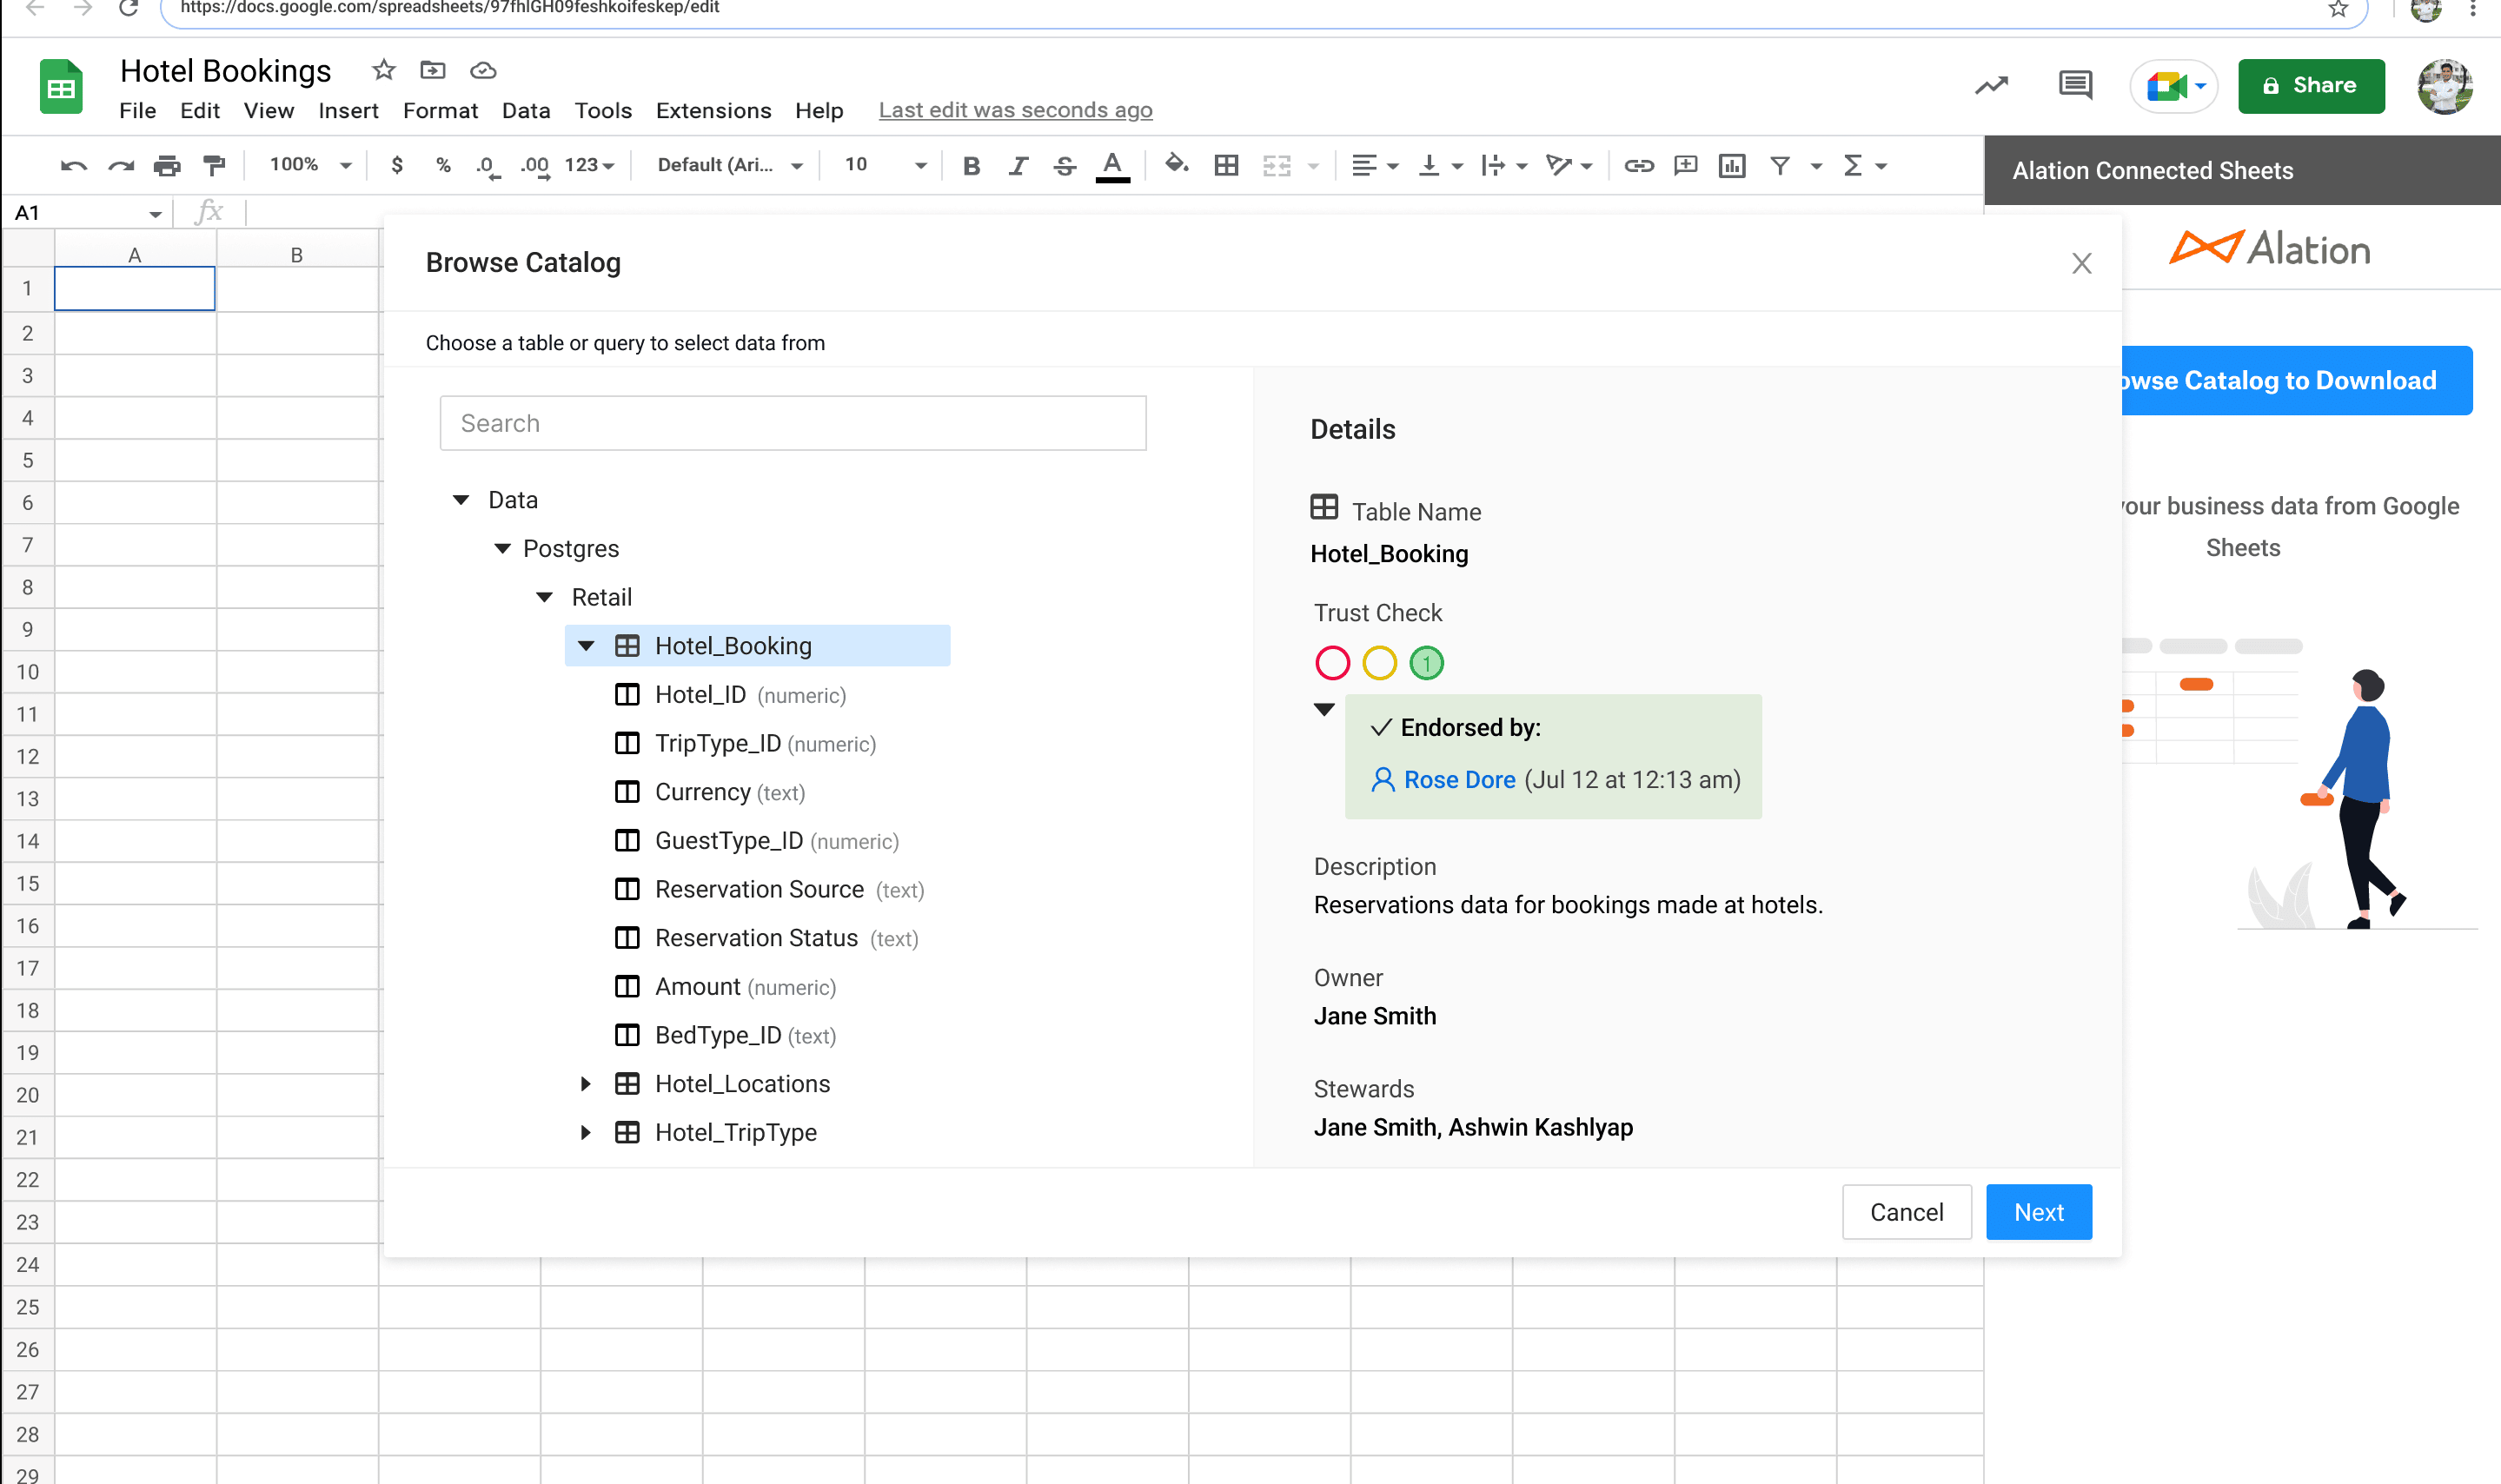 Example screenshot of how Alation Connected Sheets is used through Google Sheets.